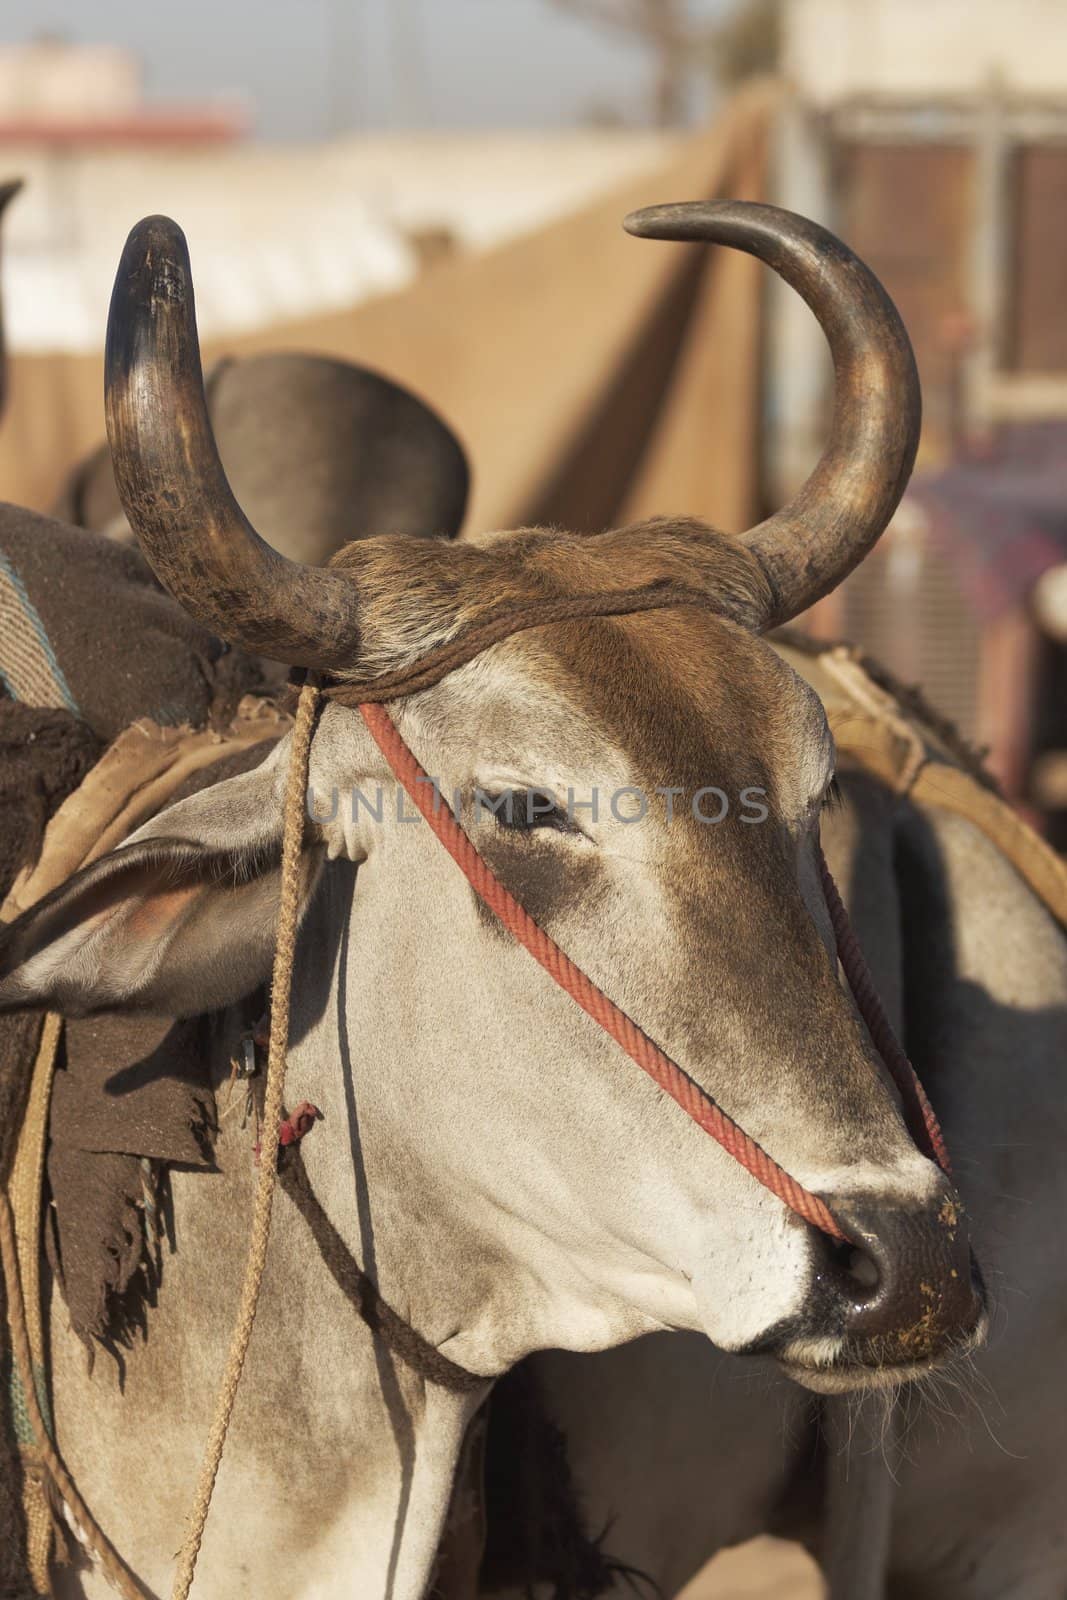 Head of a bullock being sold at the Nagaur Cattle Fair, Rajasthan, India